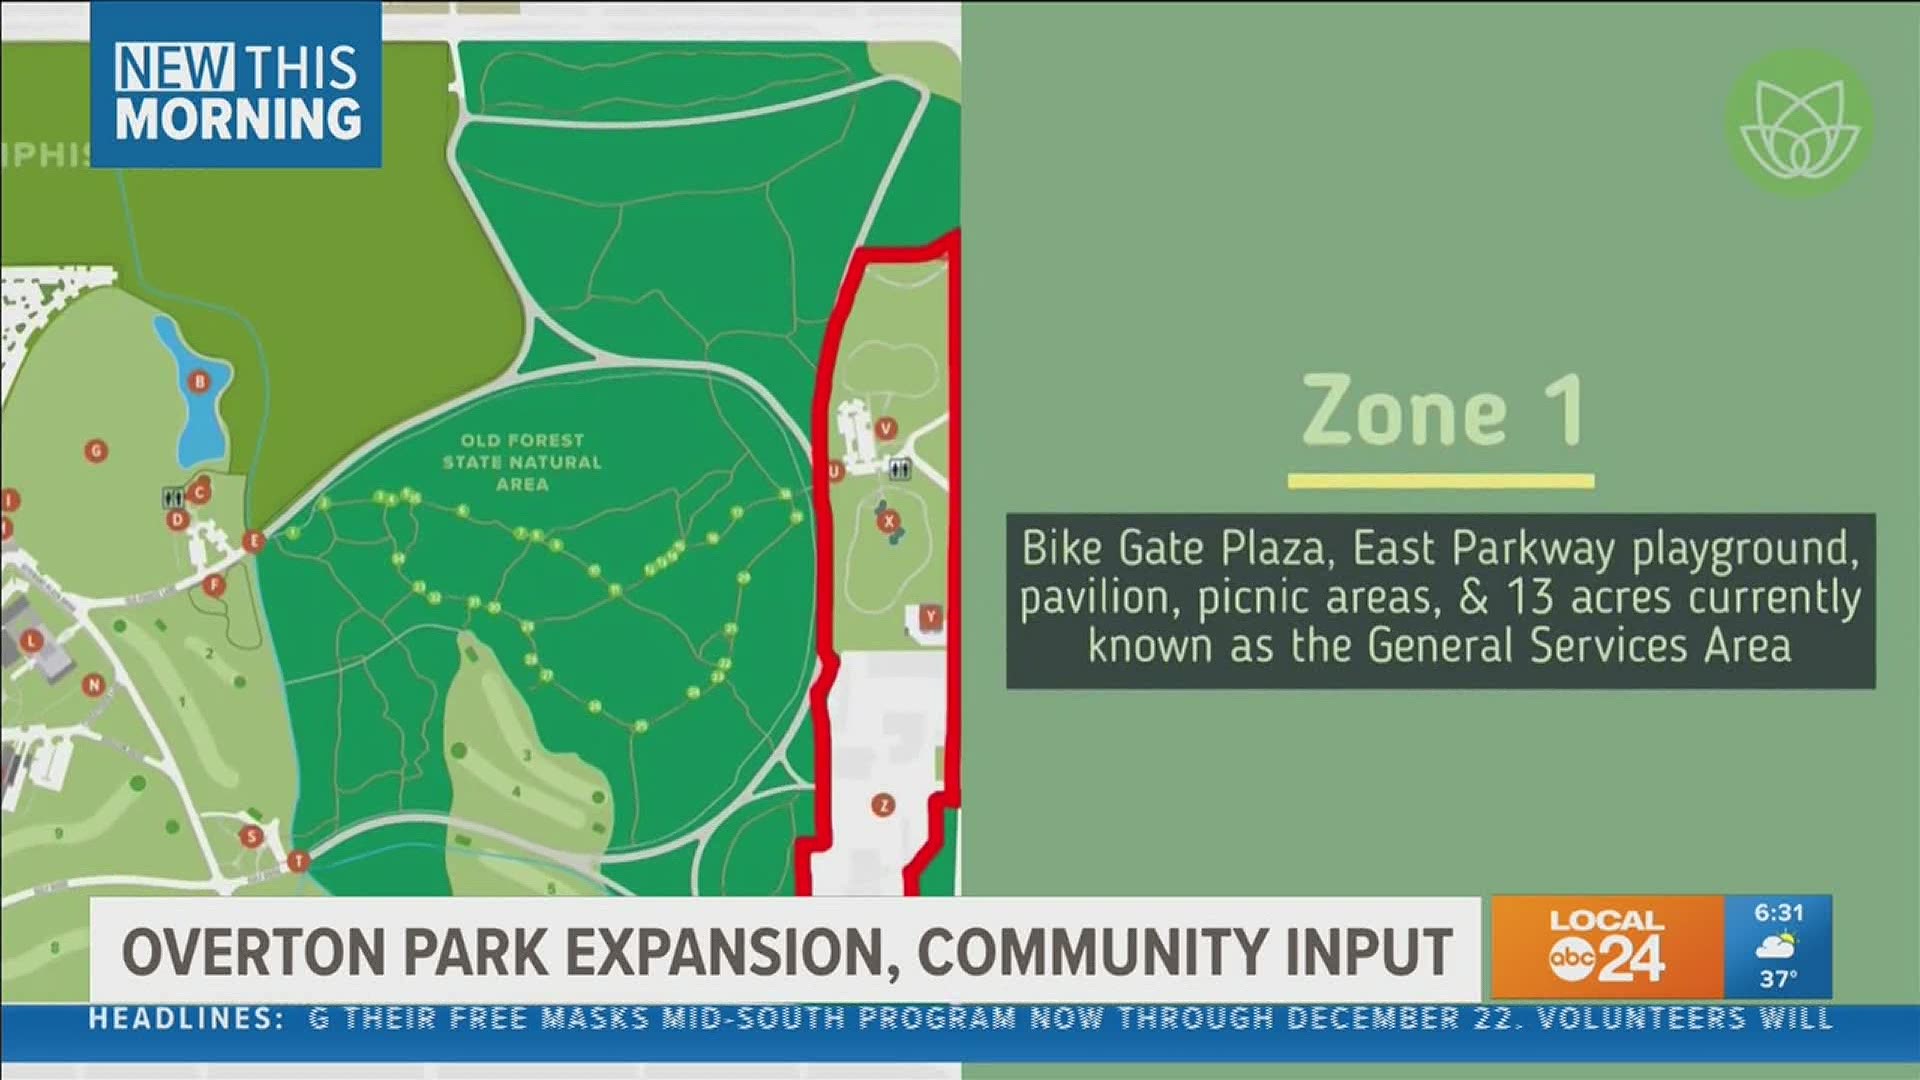 13 acres of land will be developed for public use on the southeast side of the park